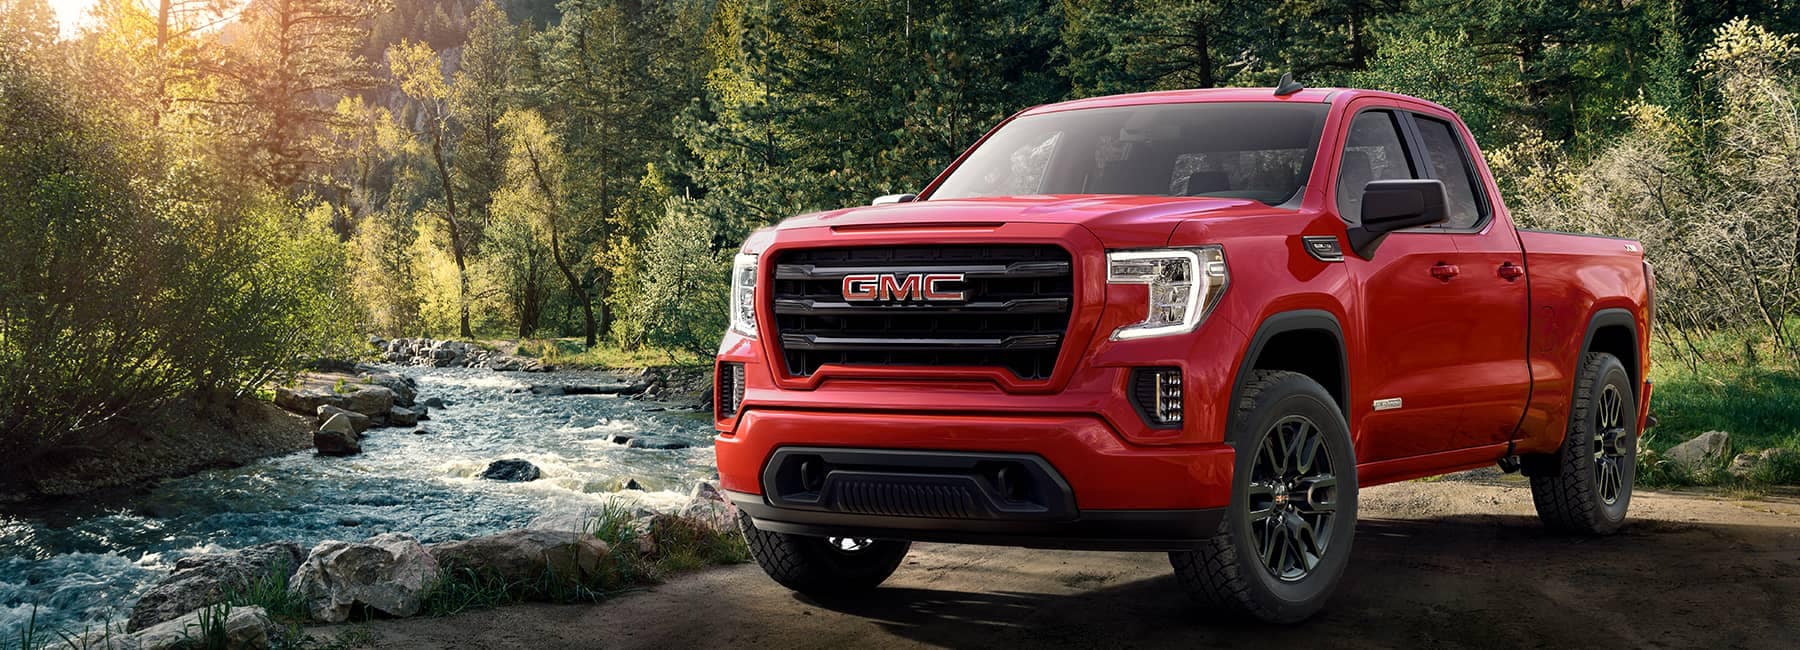 Red 2020 GMC Sierra 1500 by a River